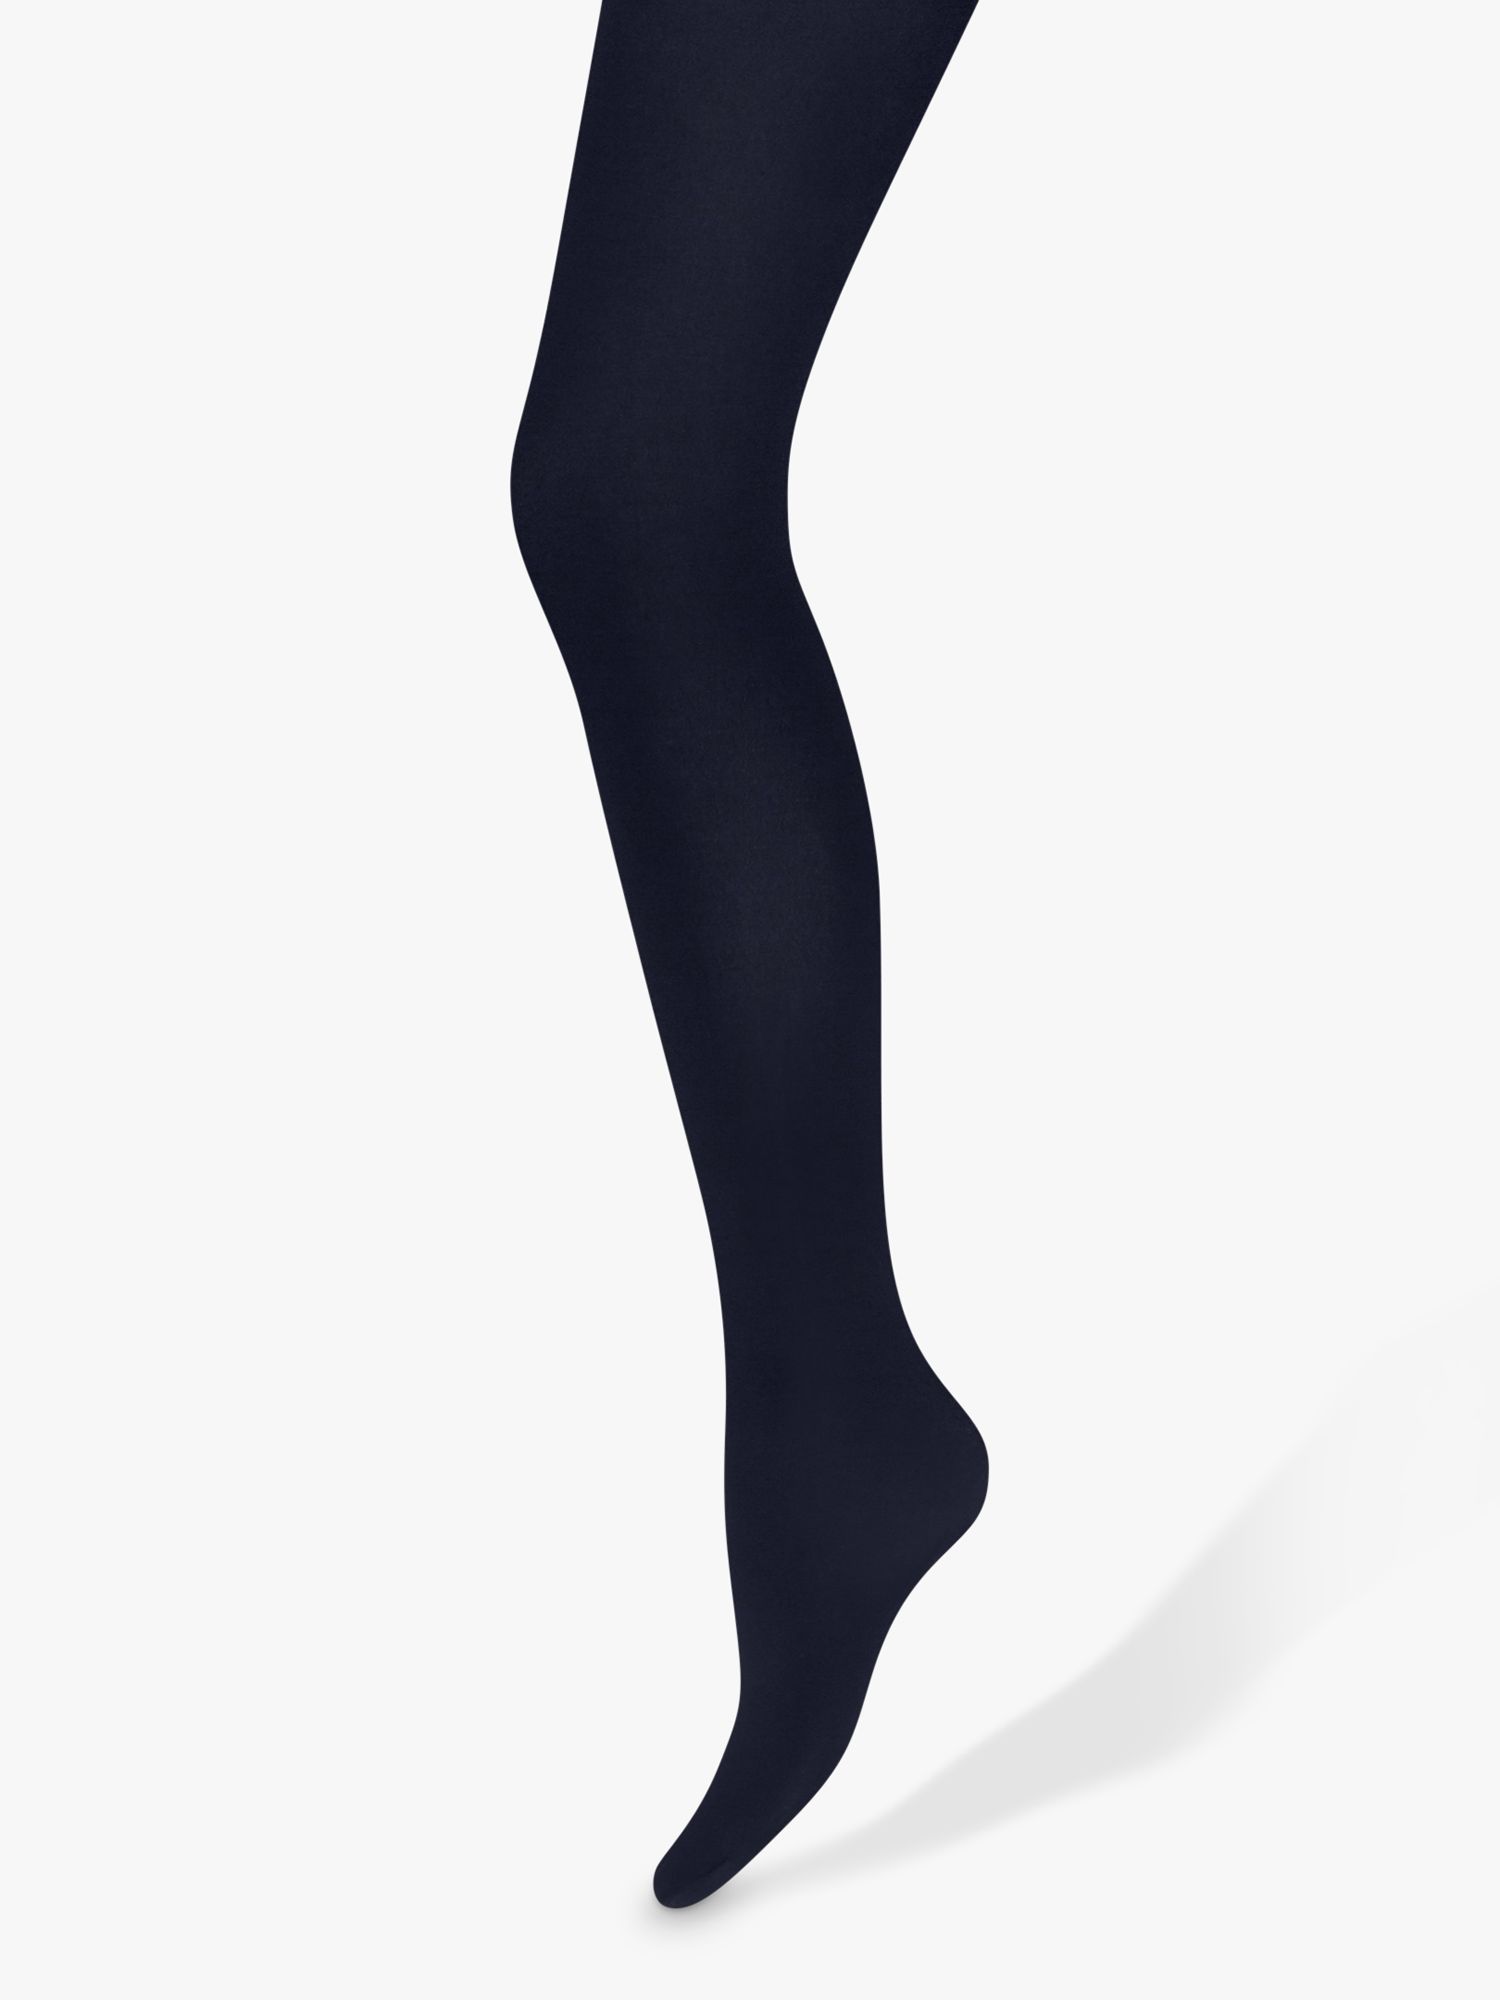 Wolford Aurora 70 Denier Opaque Tights Black At John Lewis And Partners